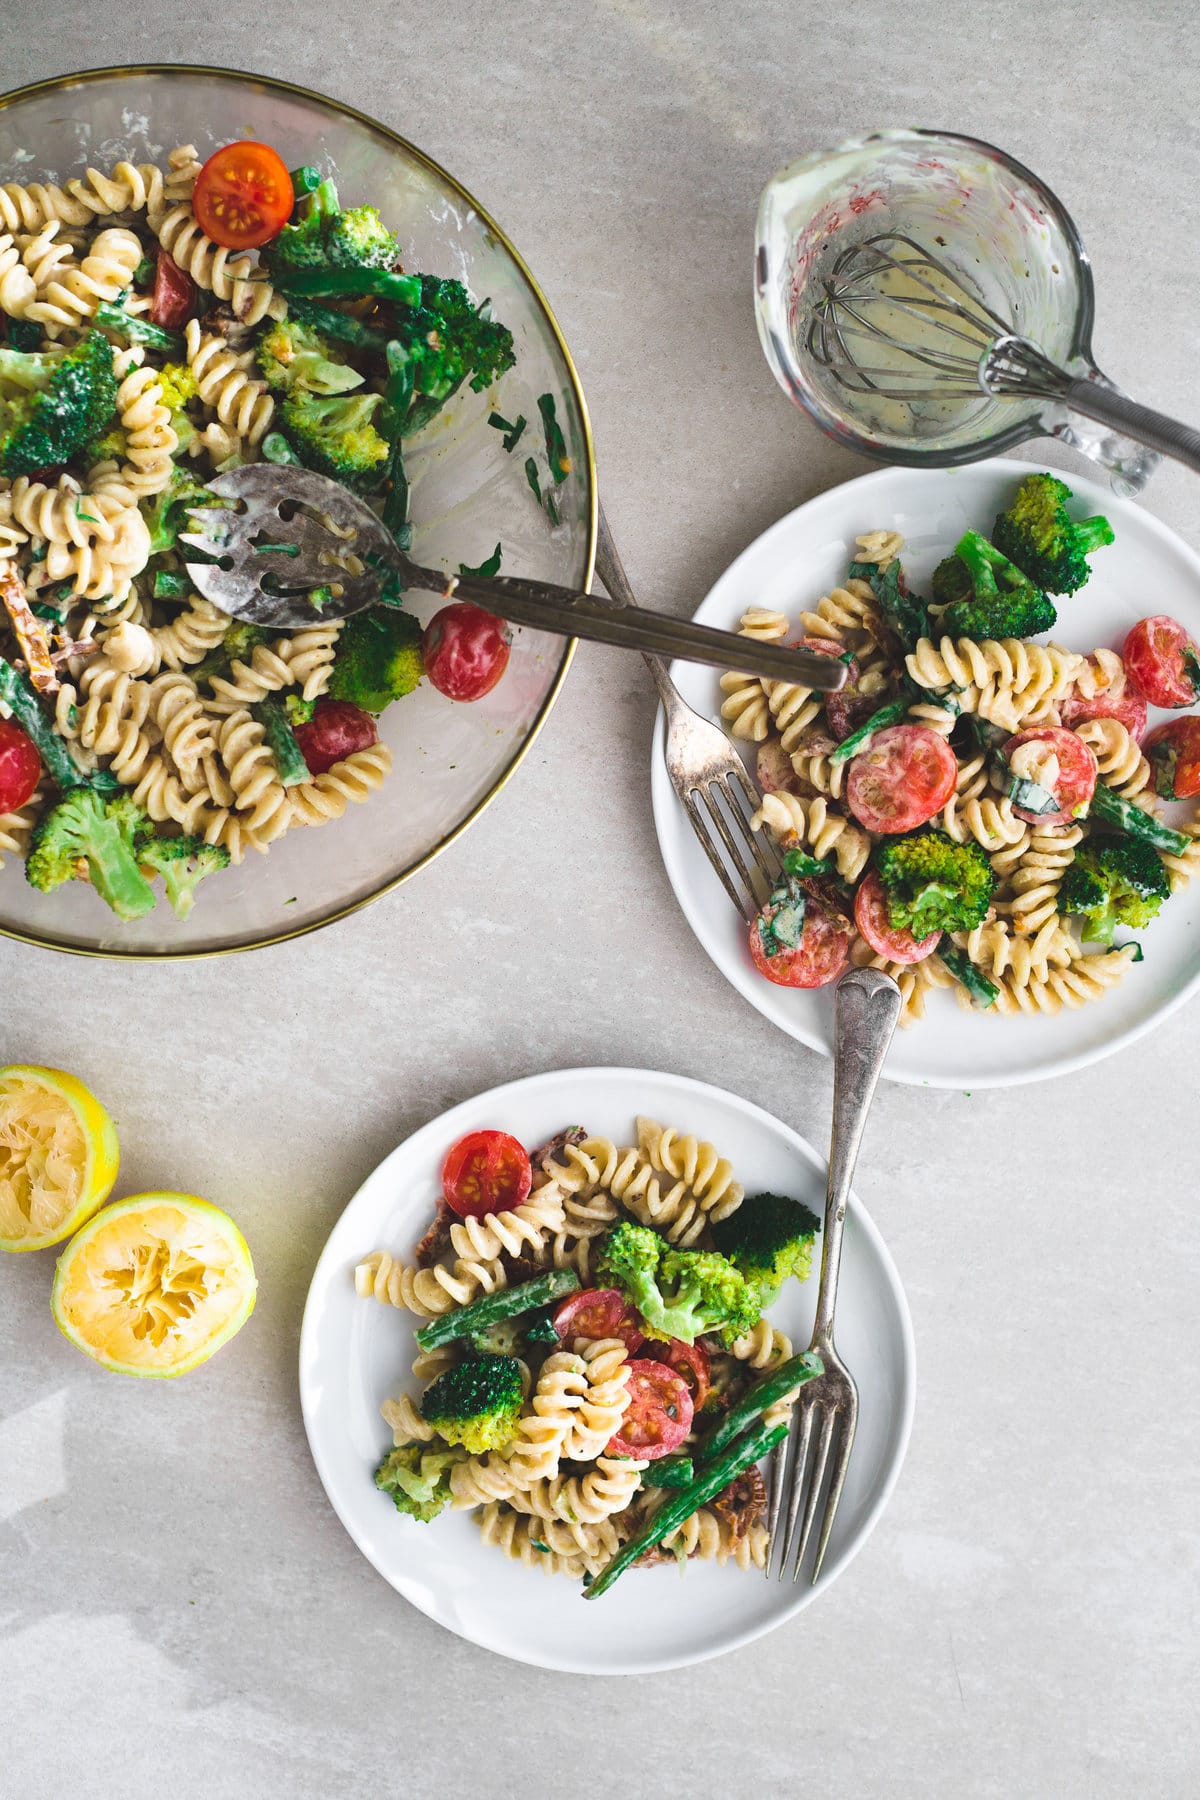 A delicious Vegan Lemon Tahini Pasta Salad loaded with Fresh Veggies and dressed with a delicious Tahini Lemon Dressing. Ready In Under 20 Minutes. #vegan #broccoli #pasta #pastasalad #lemon #tahini #simple #plantbased #dairyfree #noegg #healthy #greenbeans #simple 